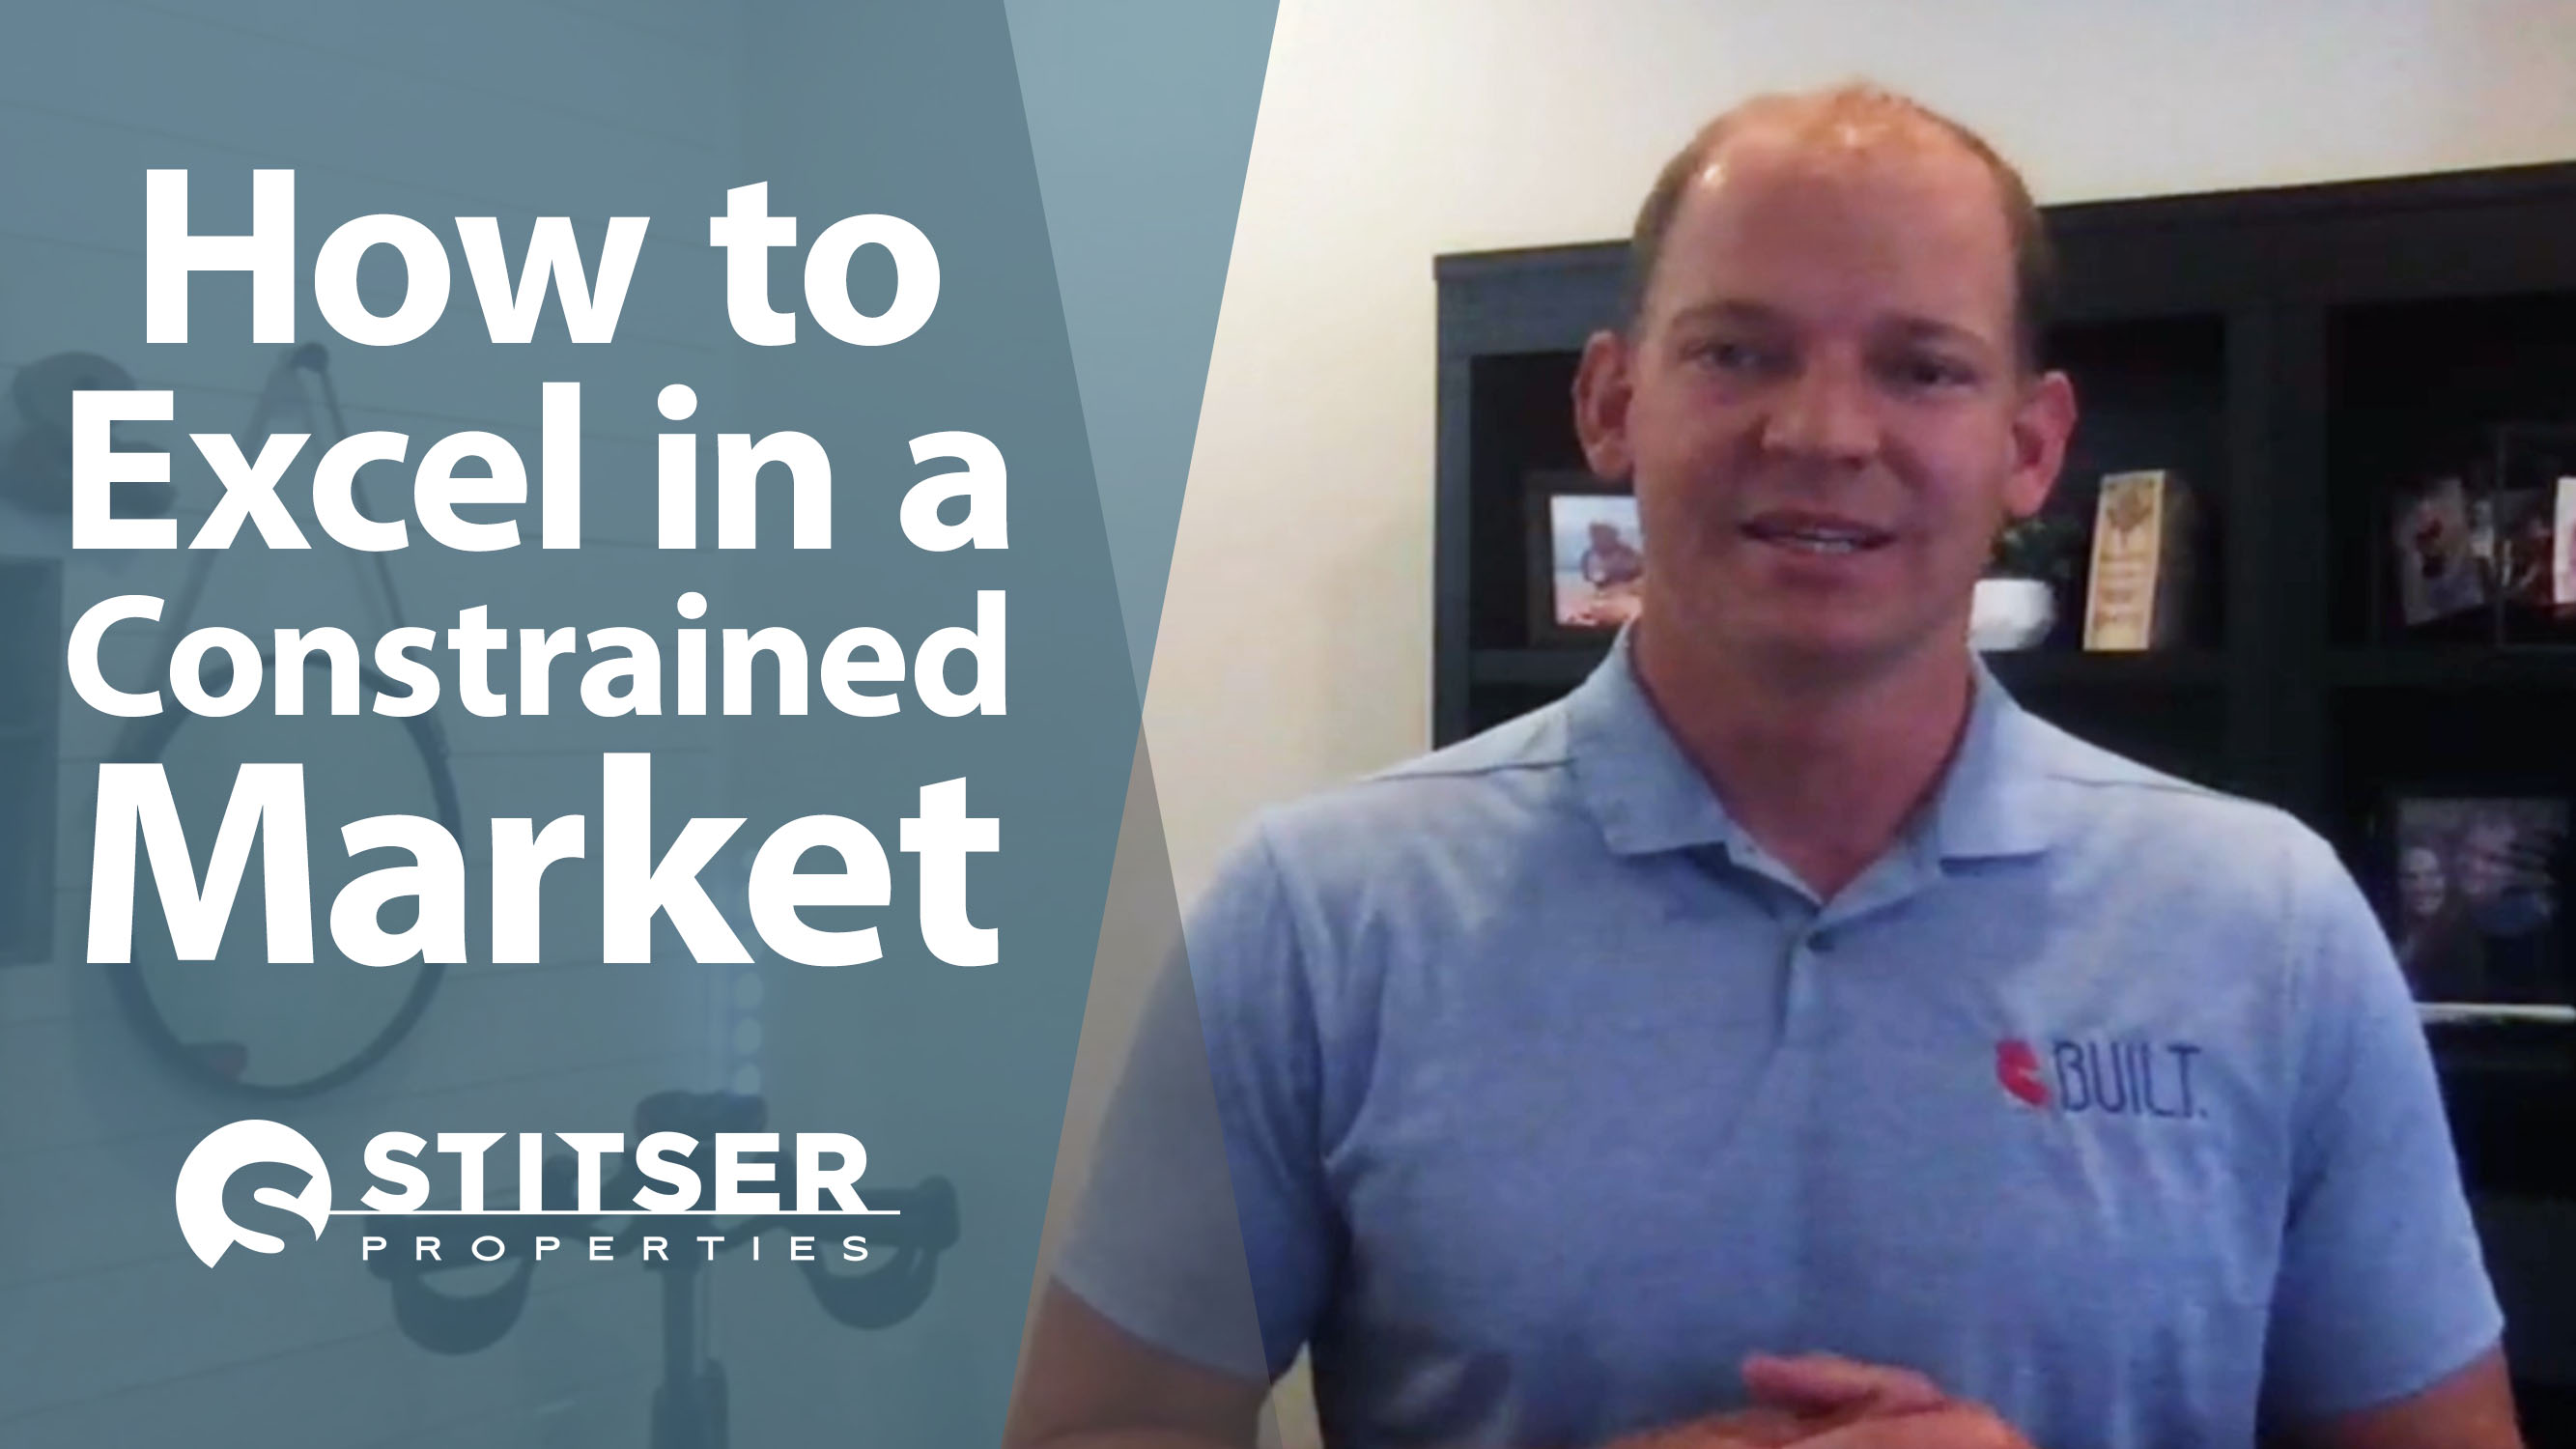 Q: What’s the First Step to Excelling in a Constrained Market?